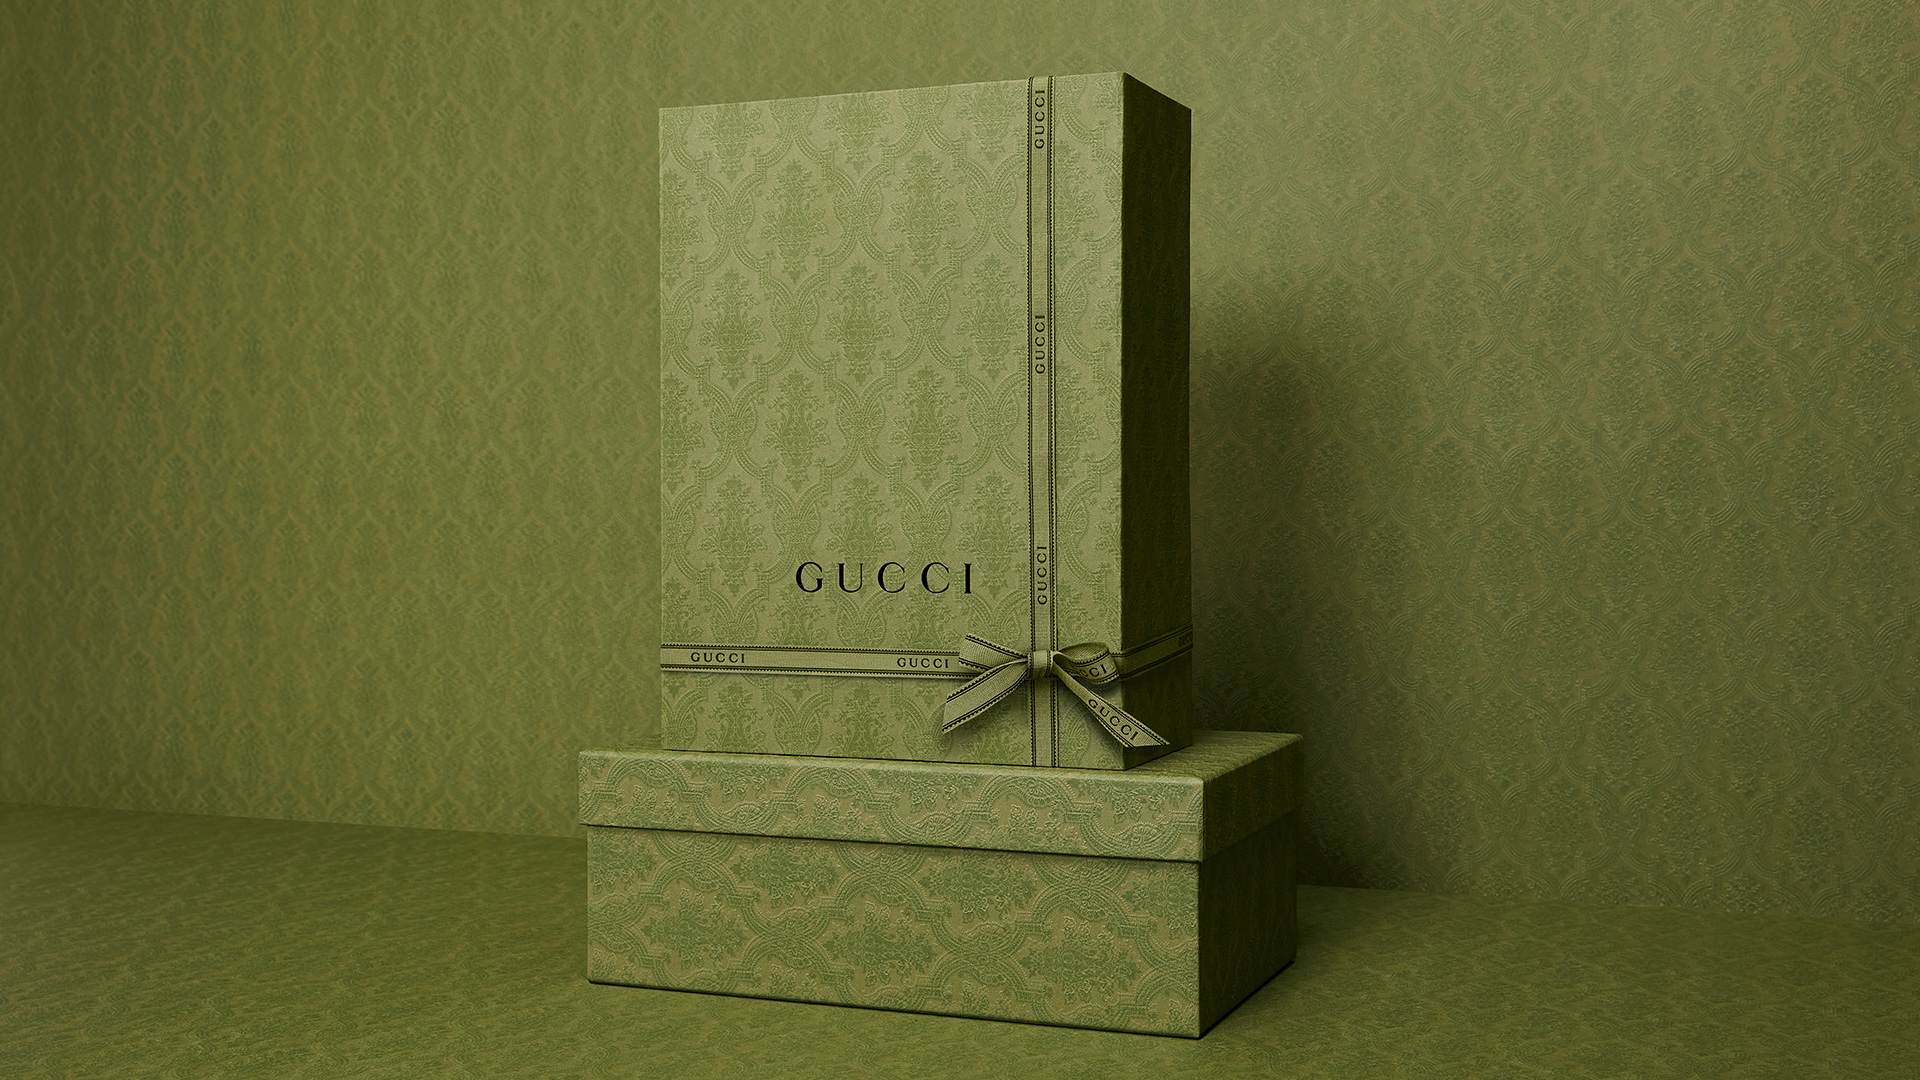 Gucci sustainable packaging